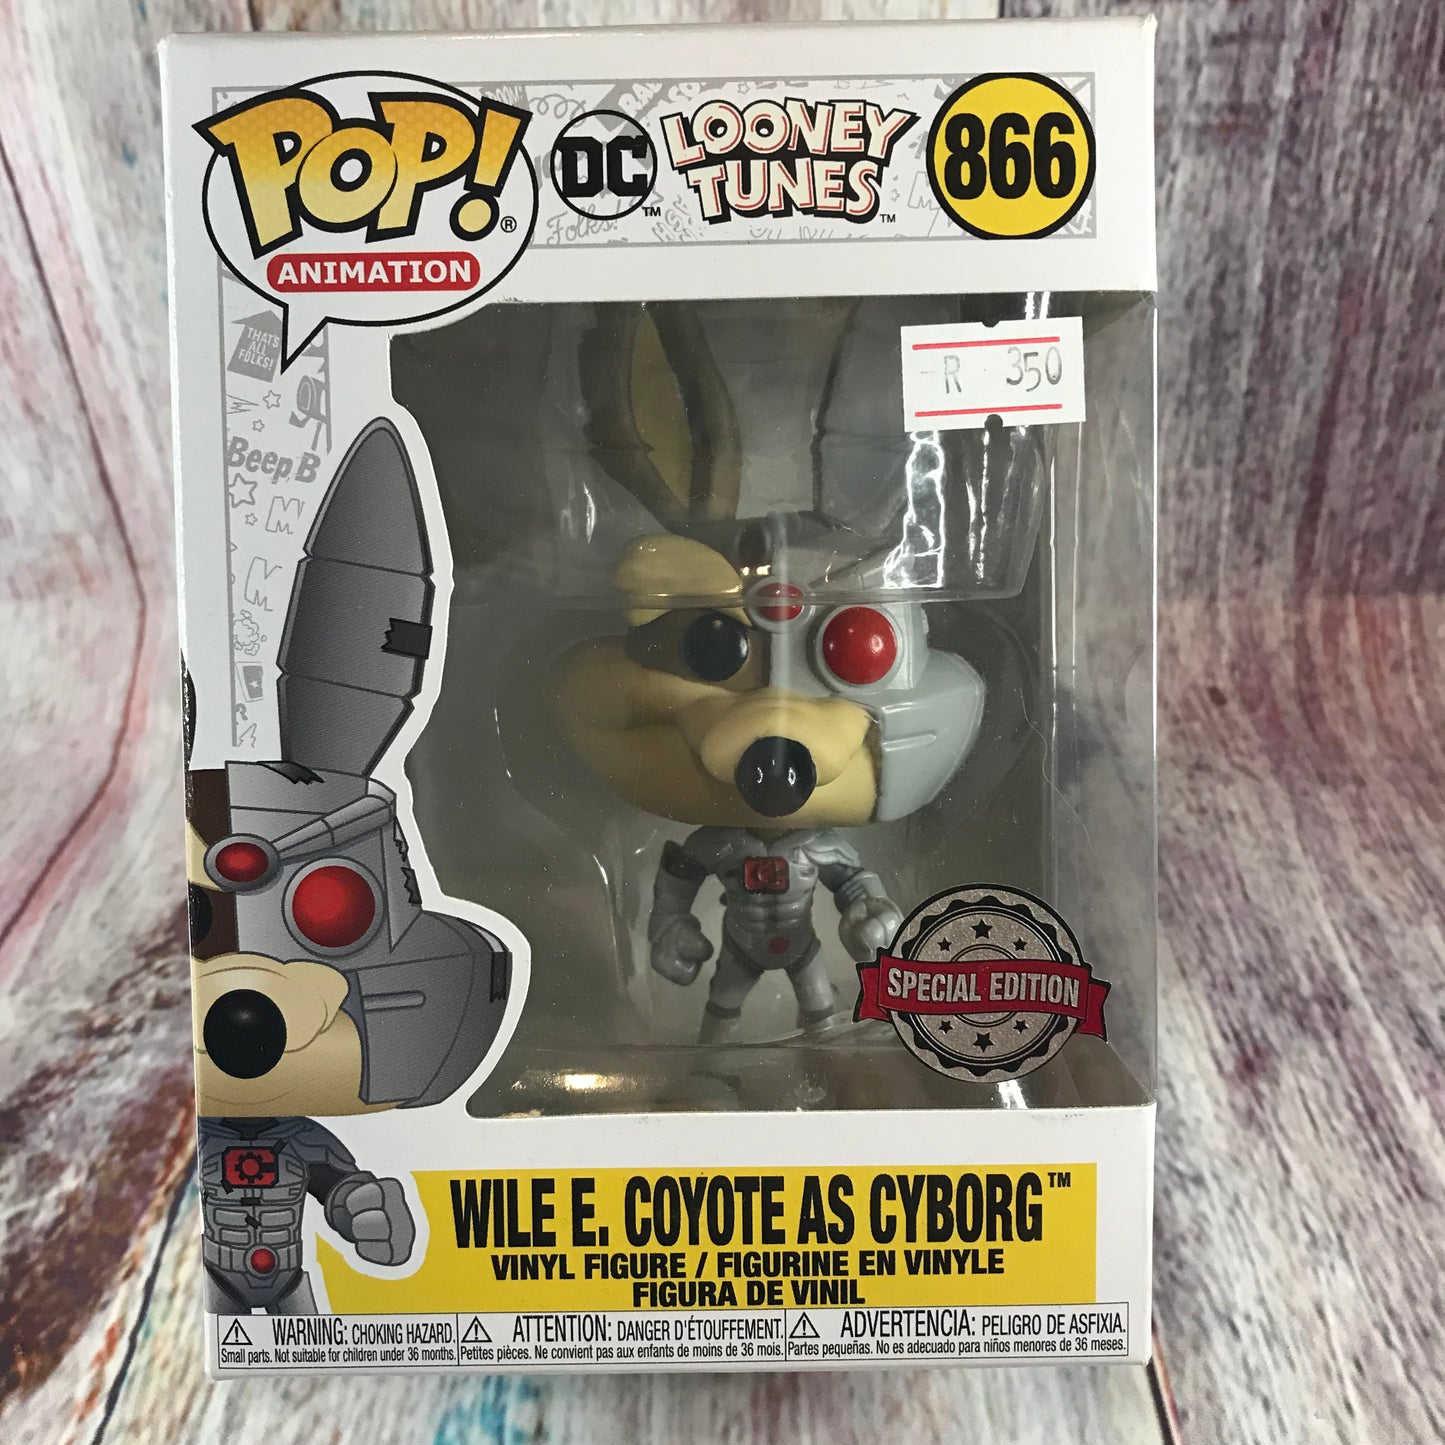 866 Looney Tunes, Wile E. Coyote As Cyborg (Special Edition)